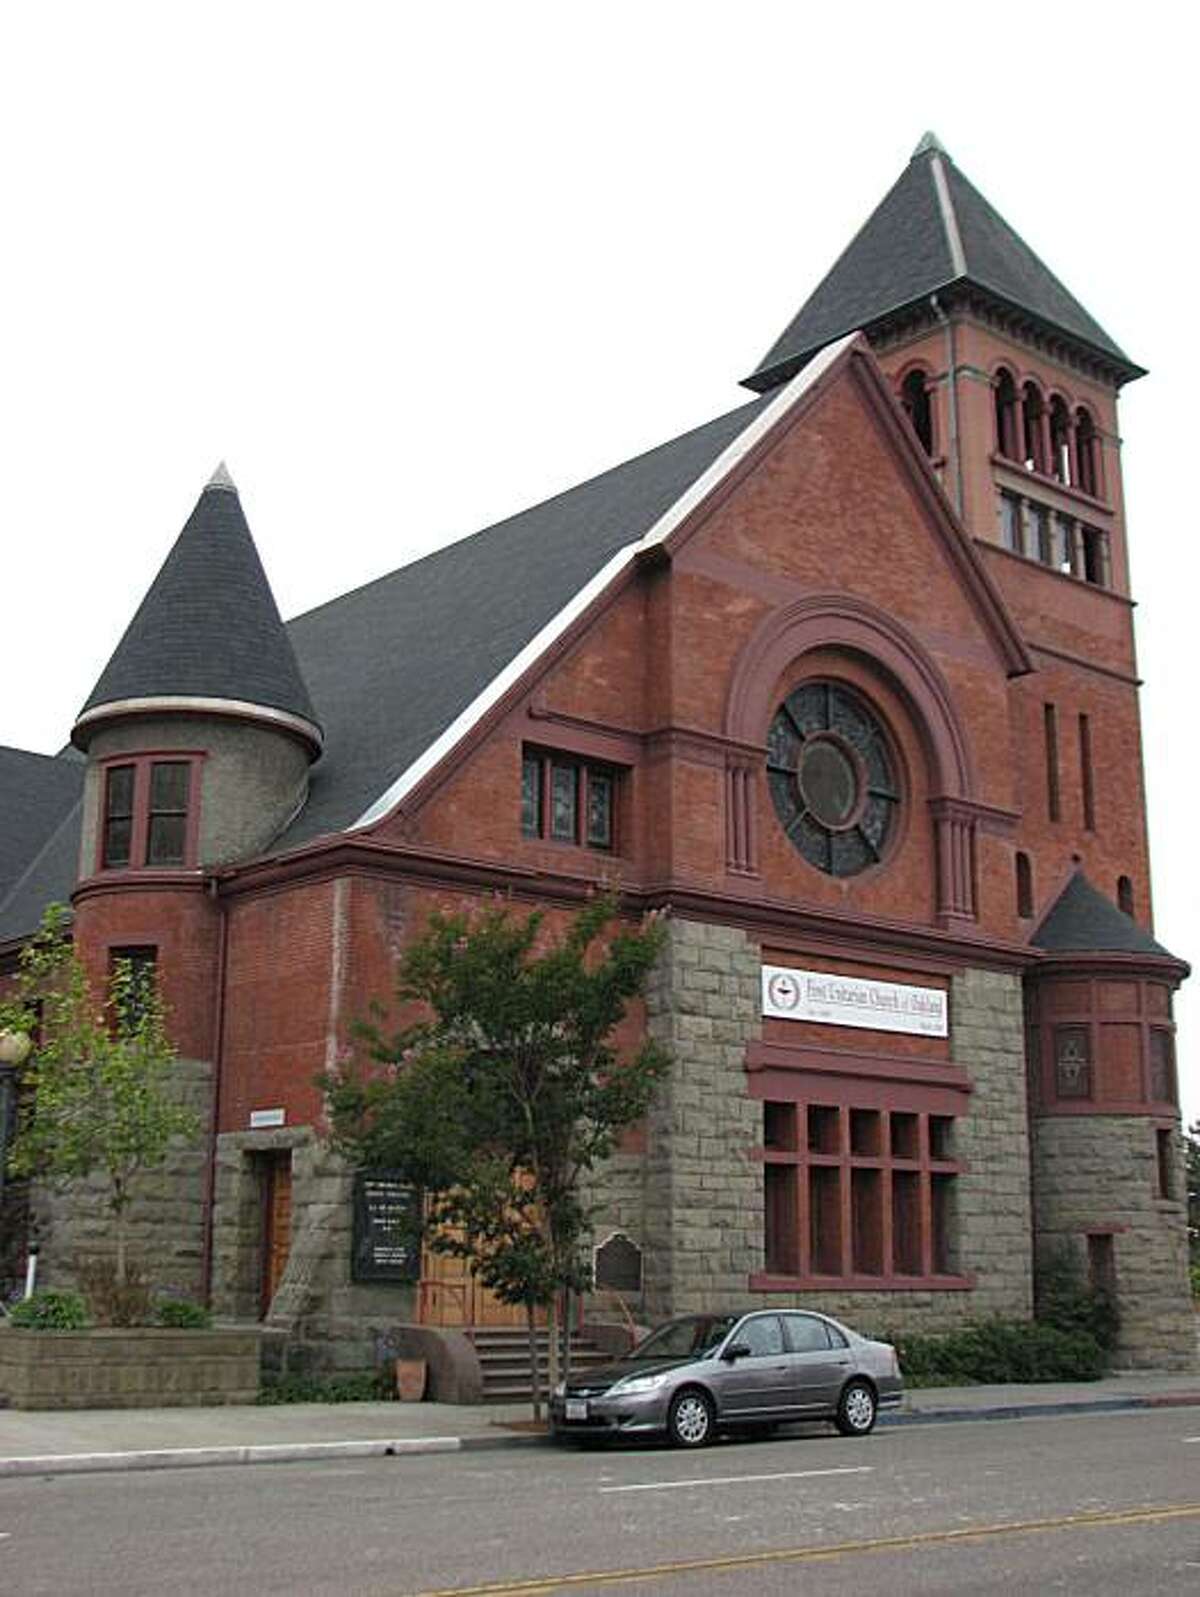 The First Unitarian Church of Oakland, designed by Walter Mathews, dates from 1891. It is at 685 14th Street in downtown Oakland.